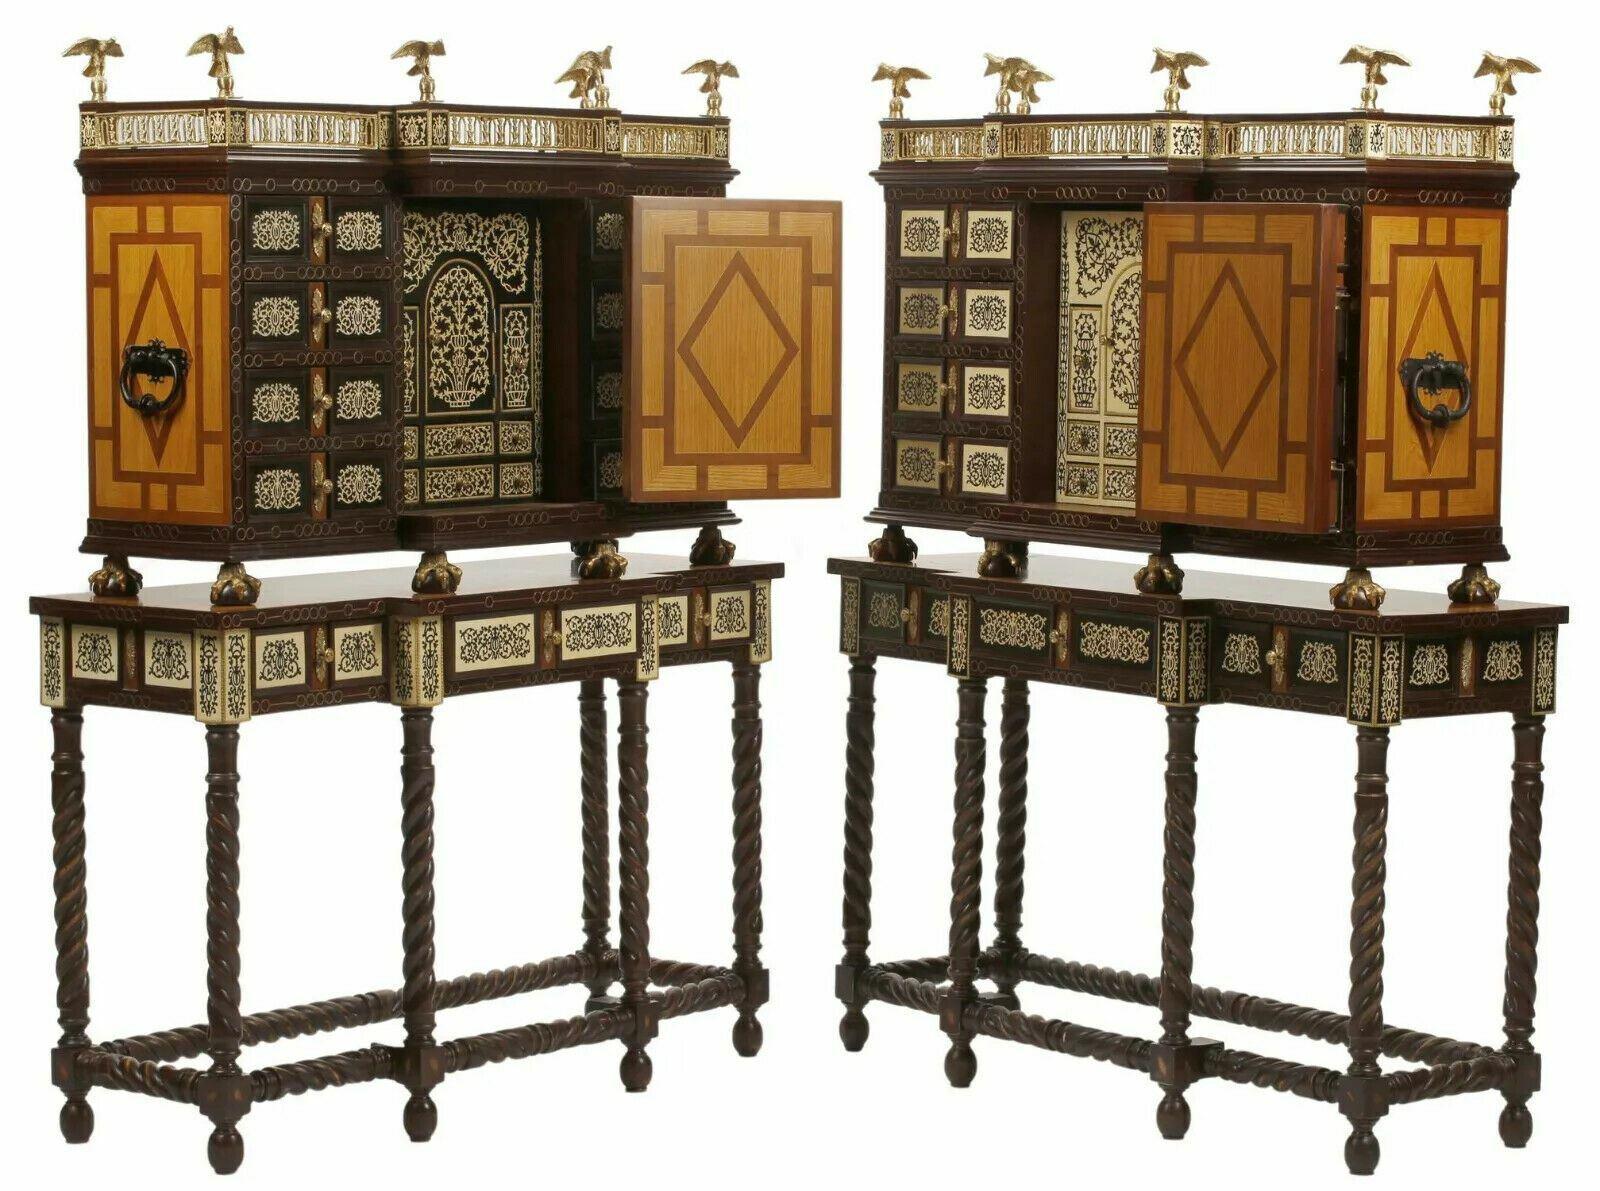 Stunning pair of Vargueno cabinets, Spanish Renaissance style, on stands, set of two, inlaid!!

(pair) Spanish Renaissance style inlaid varguenoes on stands, approximately 71